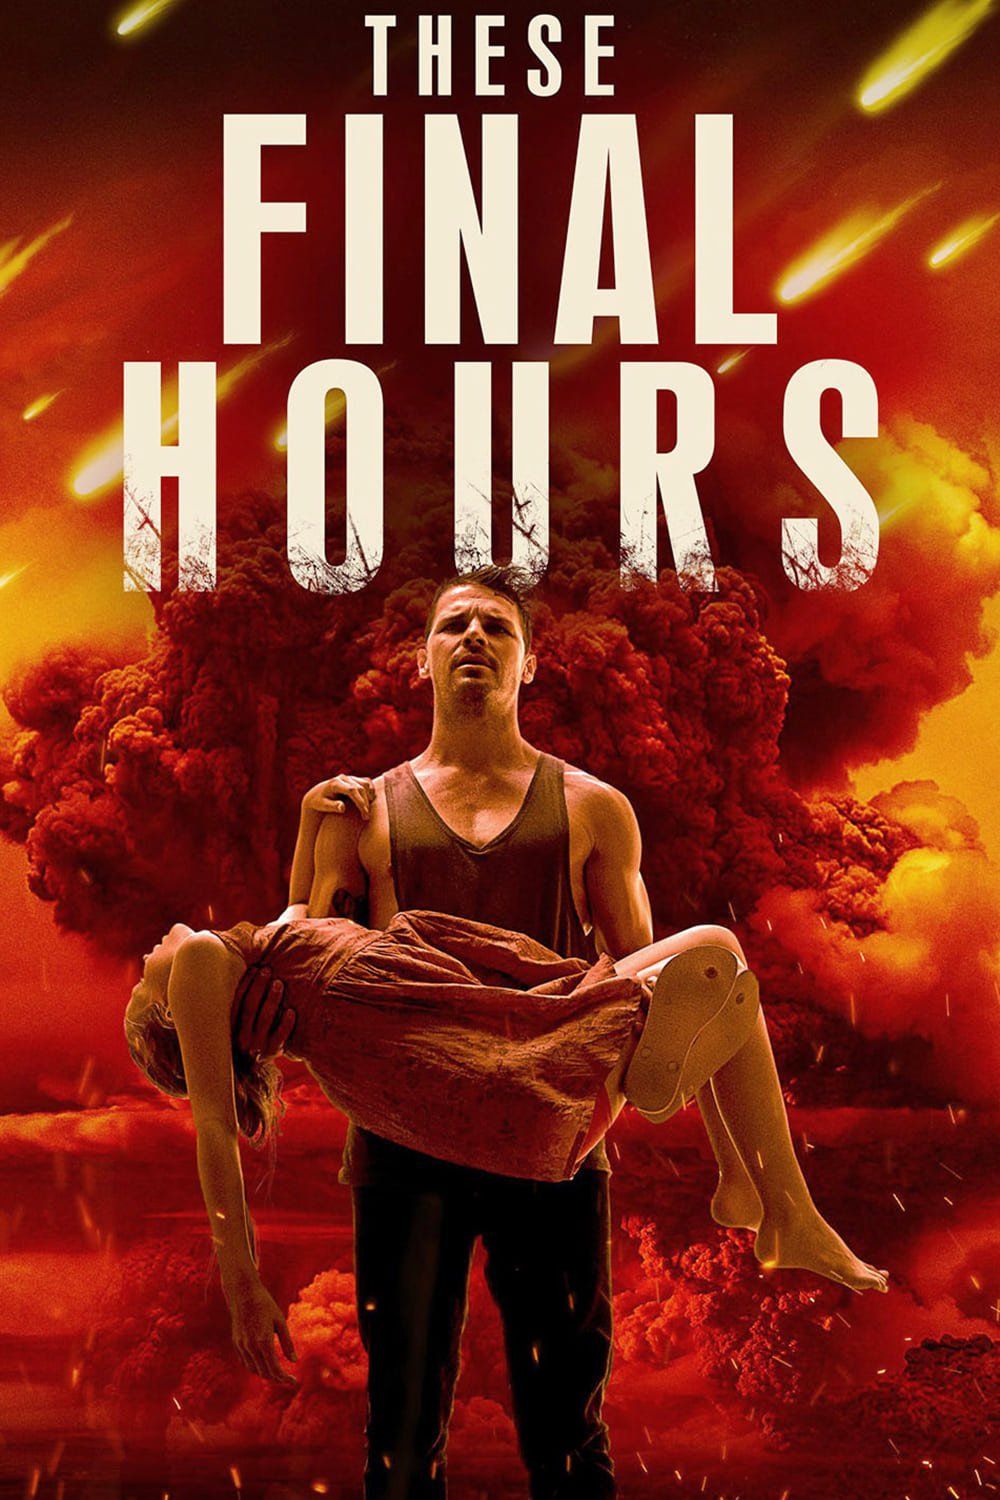 These Final Hours (2014)